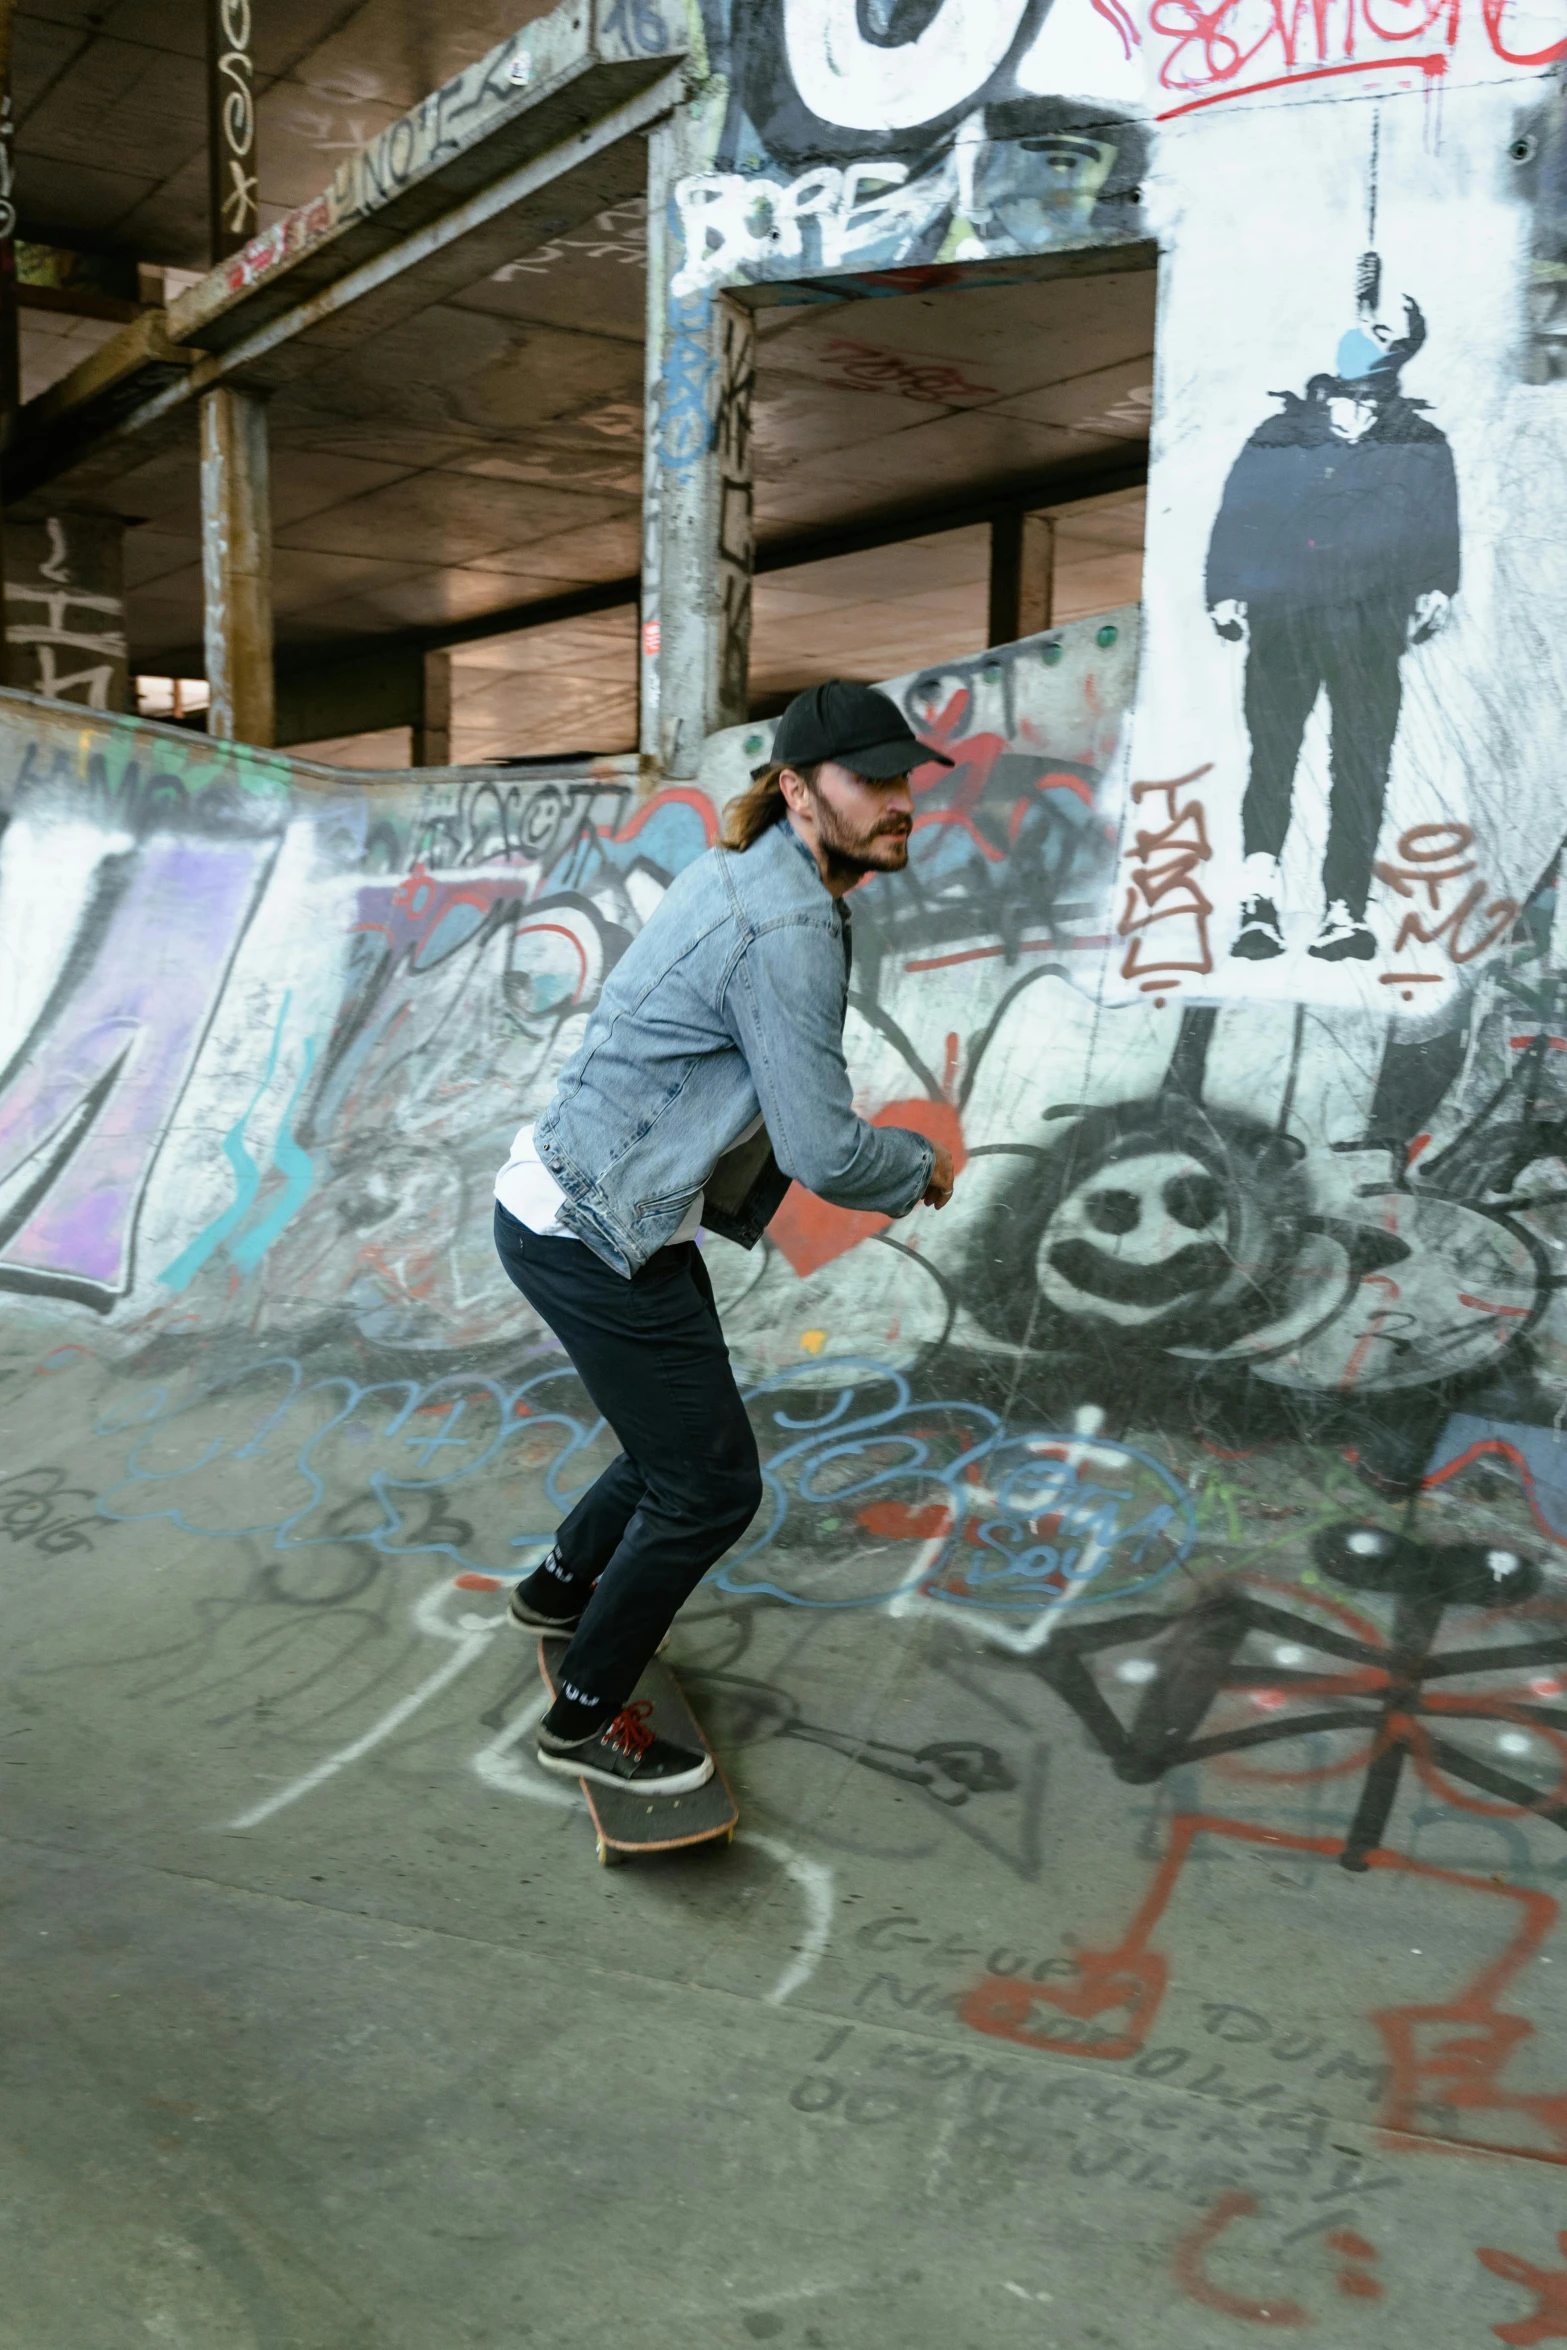 a young man skateboarding on a ramp covered in graffiti